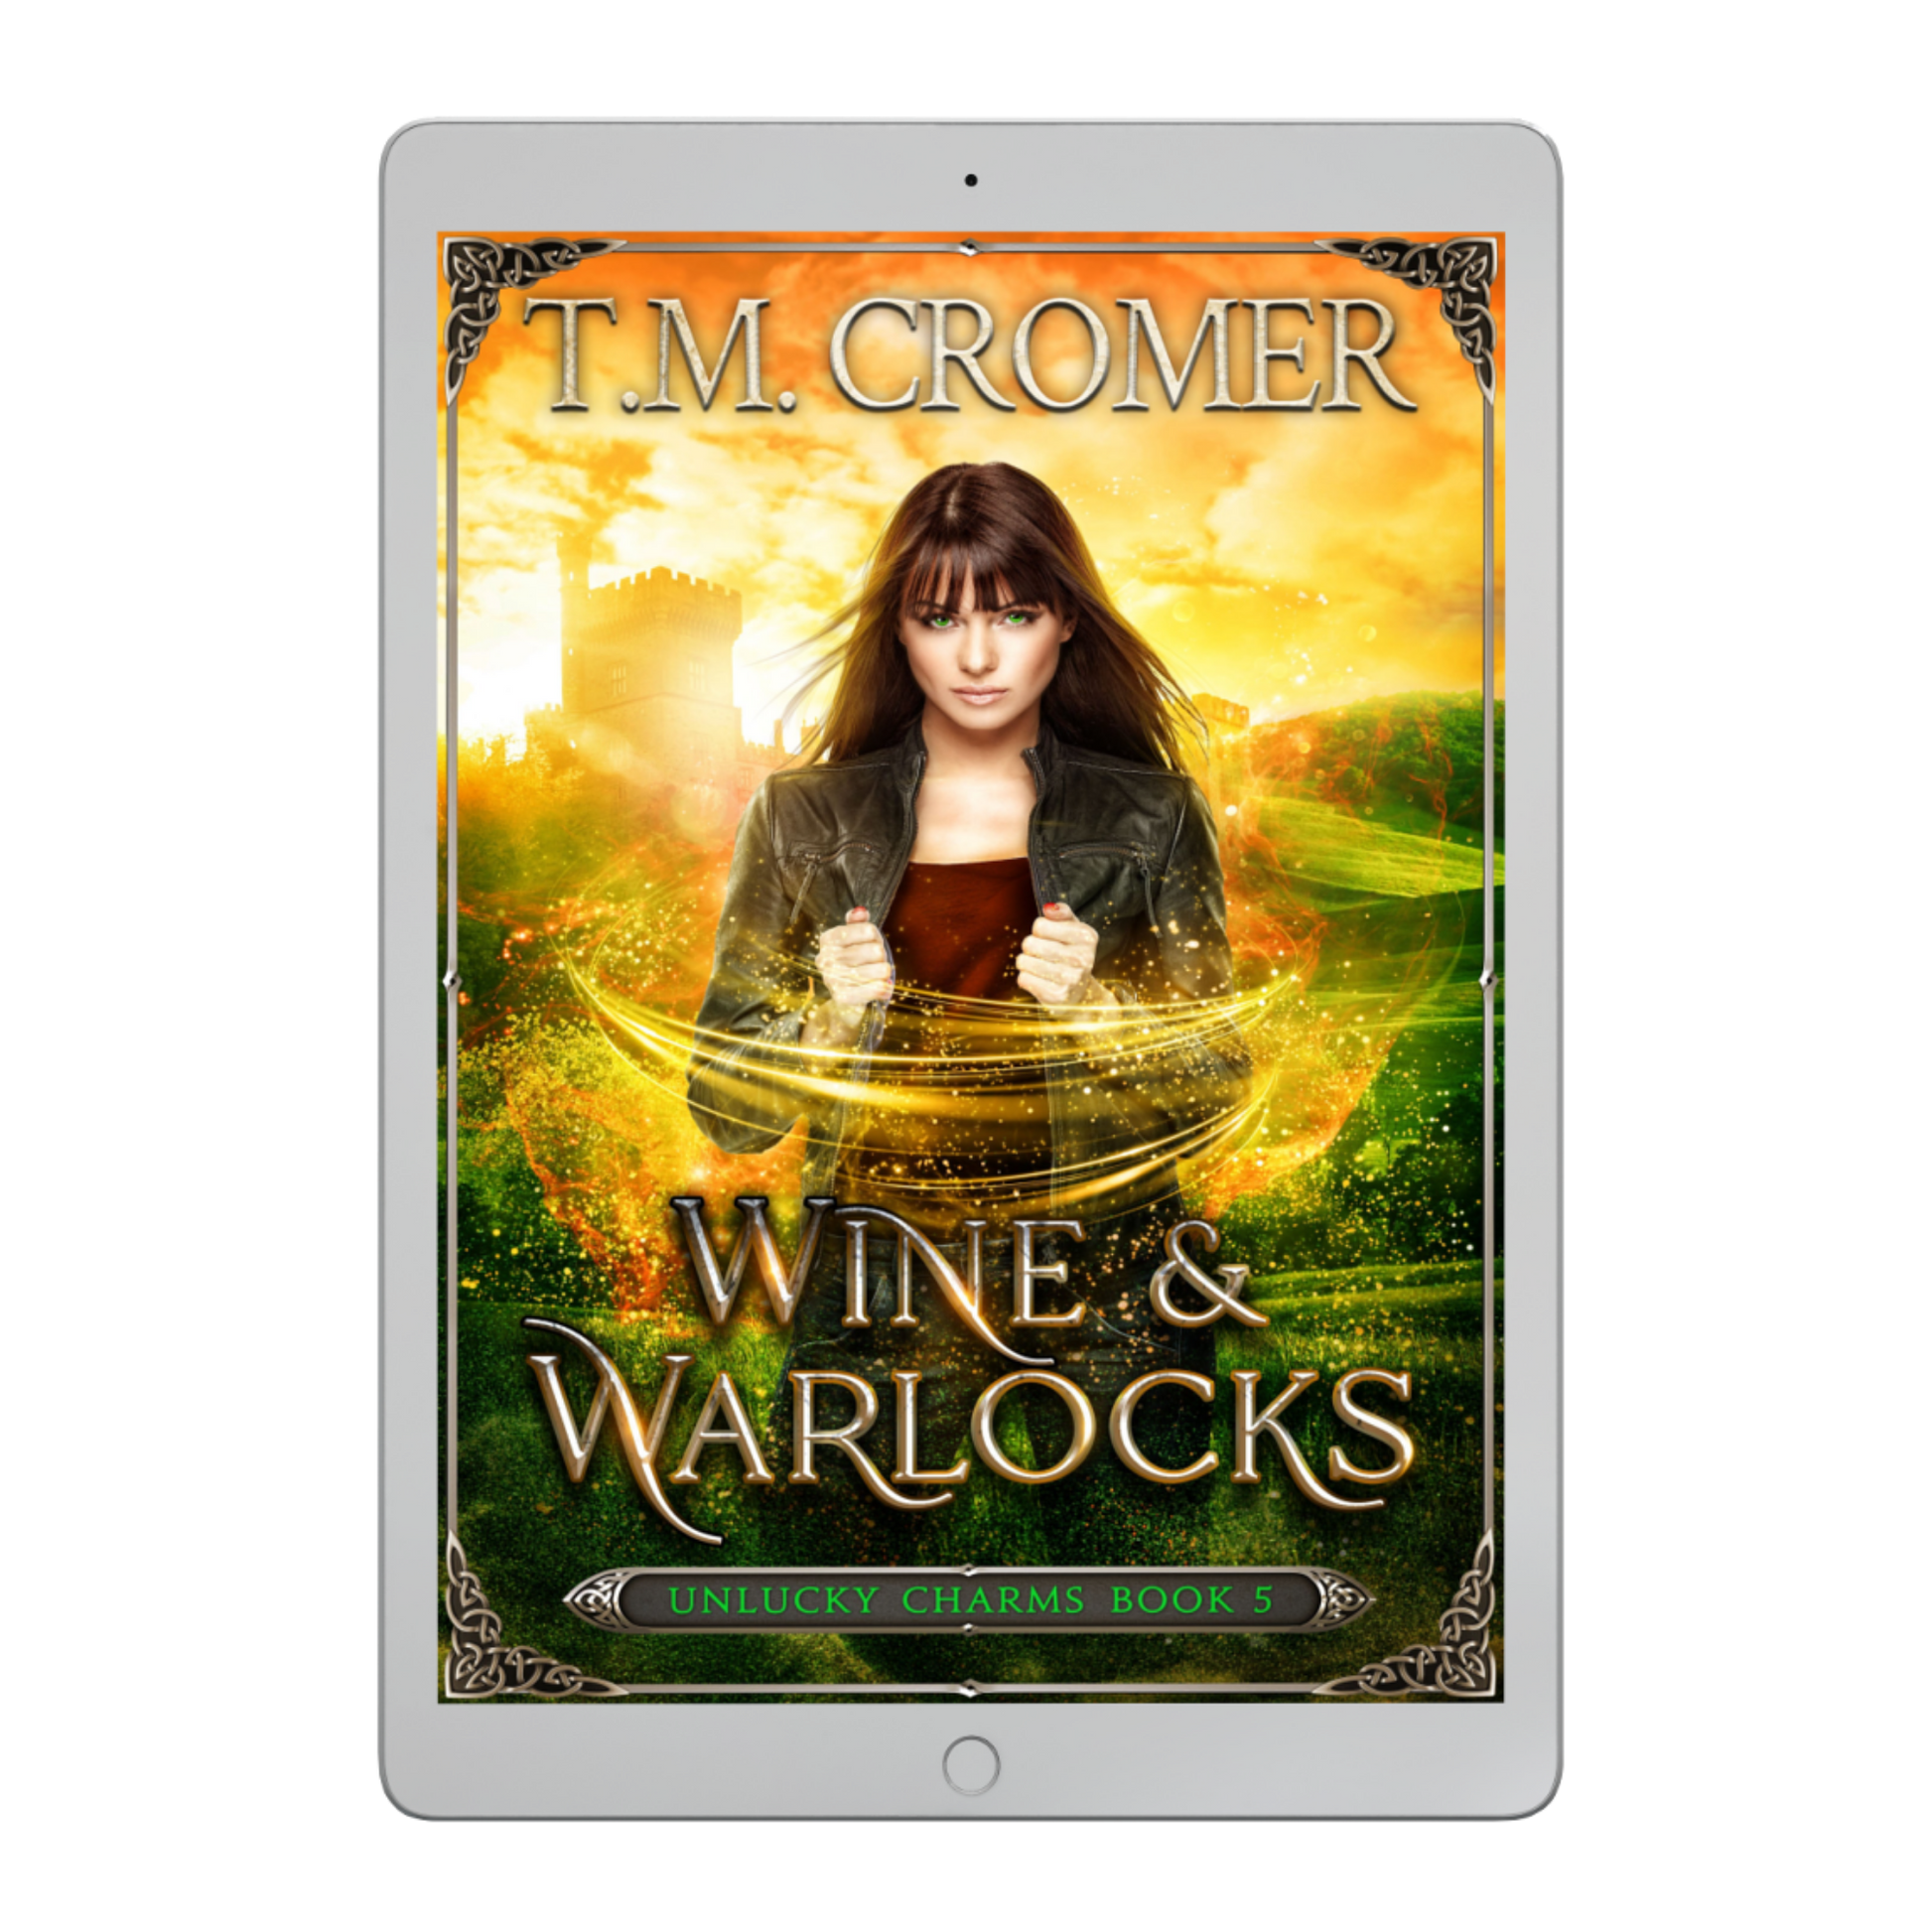 Wine and Warlocks Unlucky Charms #5 Ebook Paranormal Romance Urban Fantasy Magical Realism Irish Adventure Witches and Warlocks